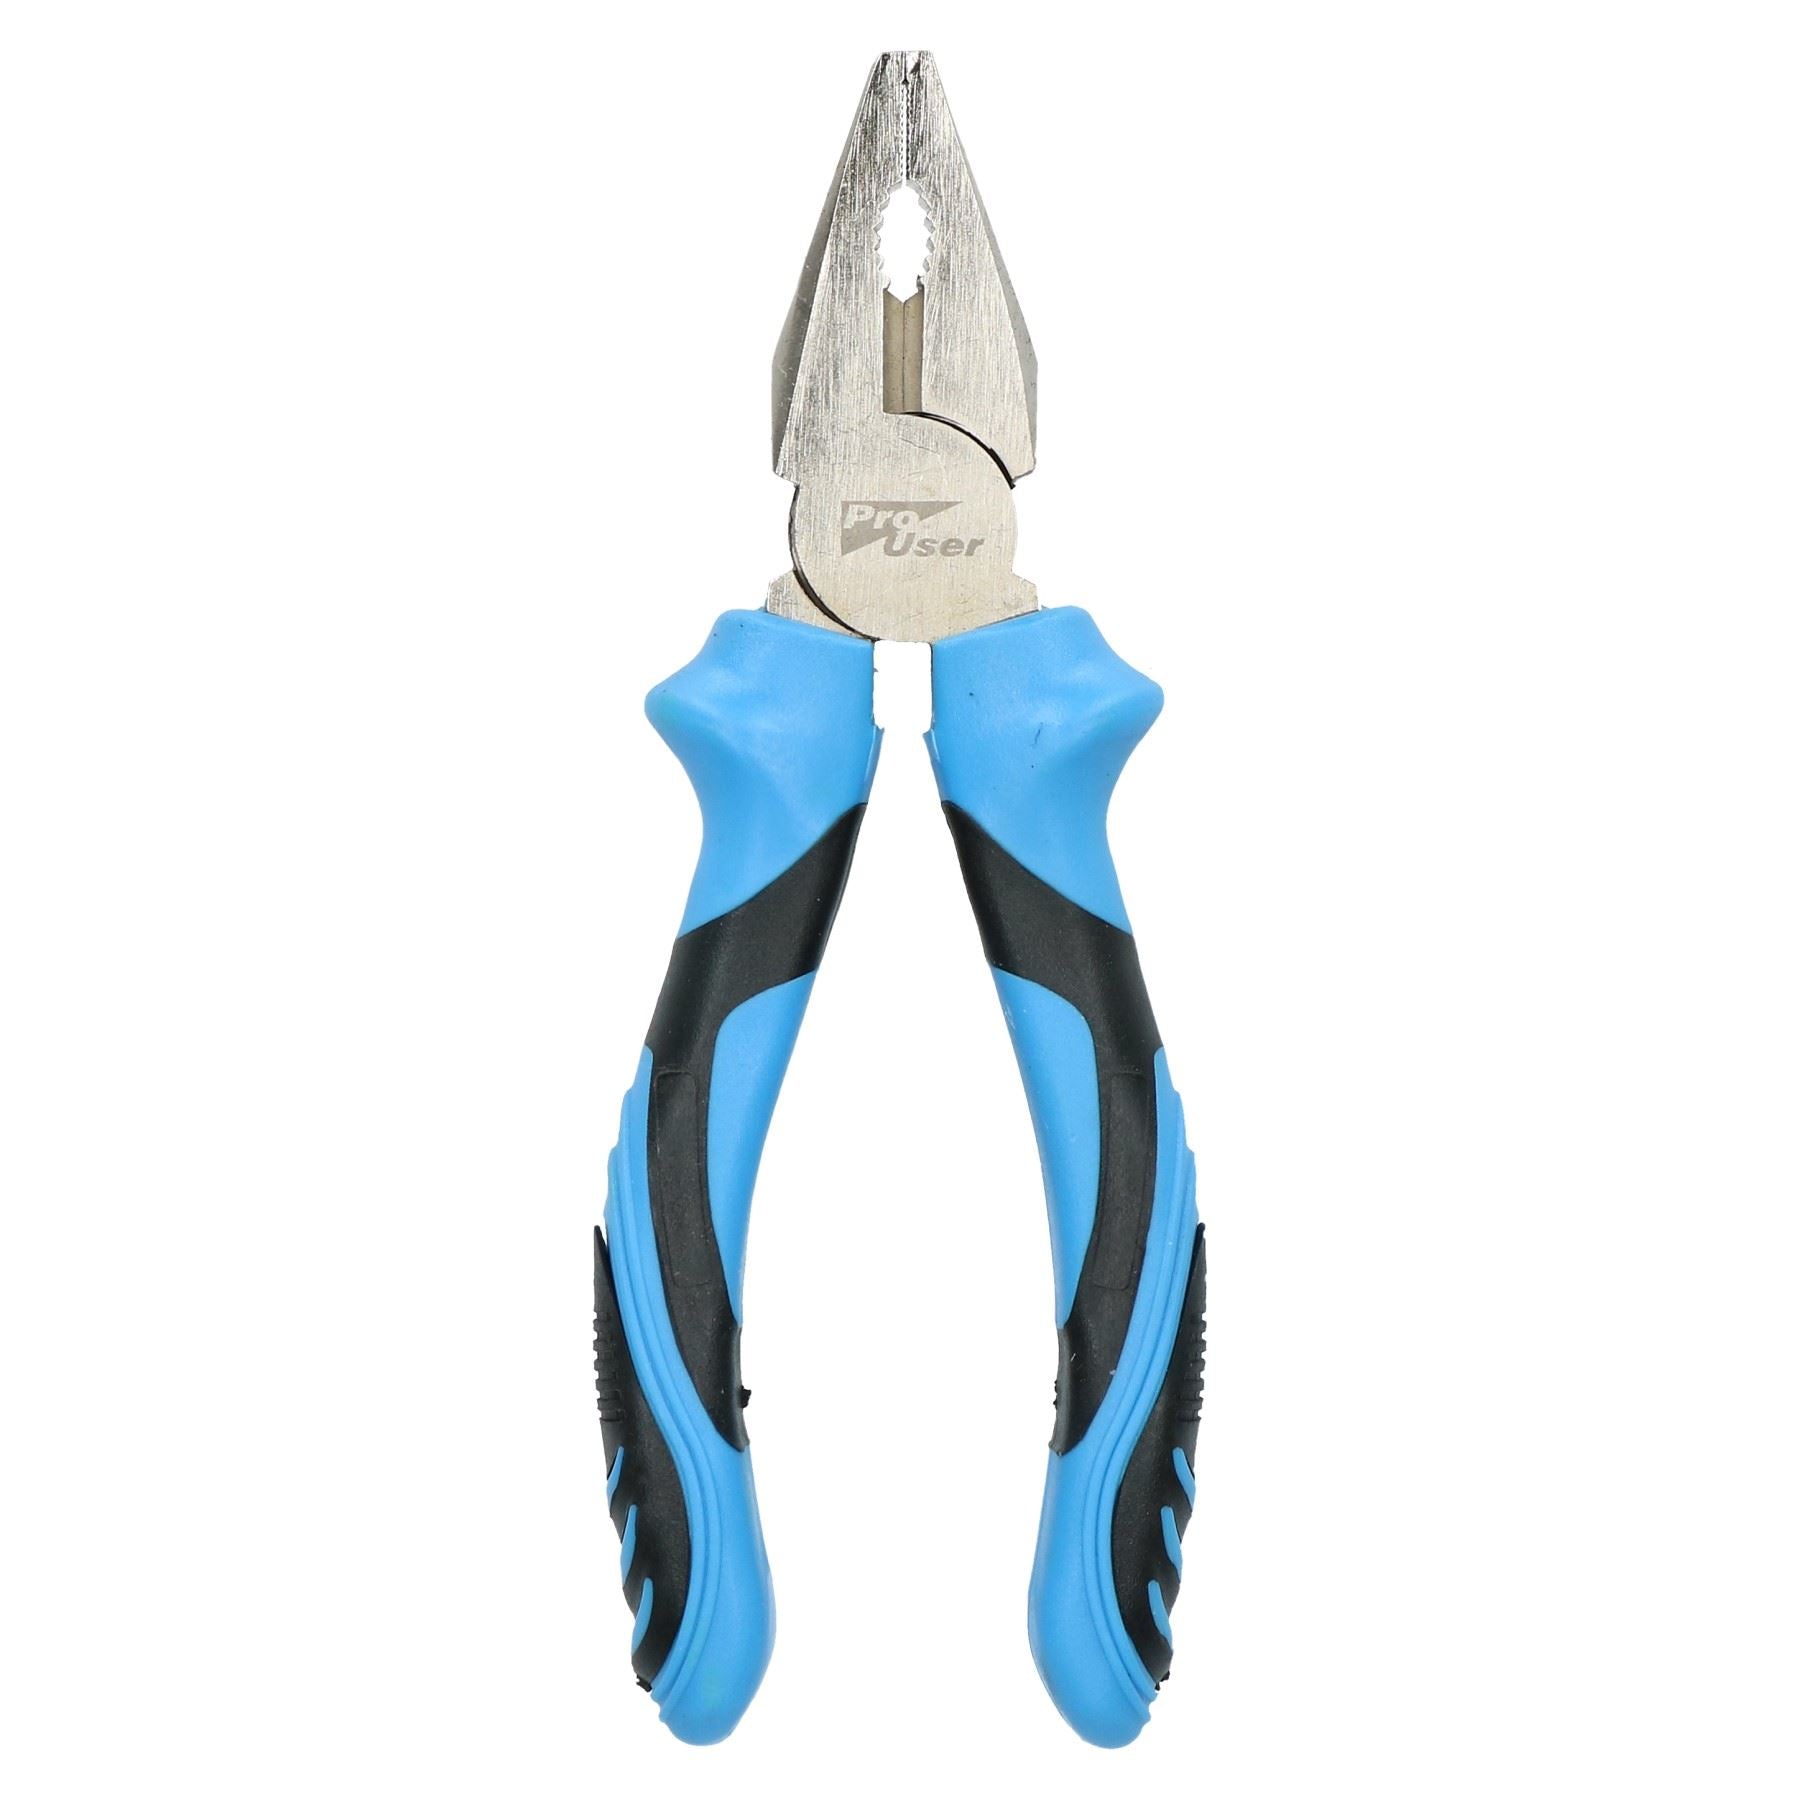 6" / 150mm Combination Combo Engineers Pliers Anti Slip Soft Grip High Leverage